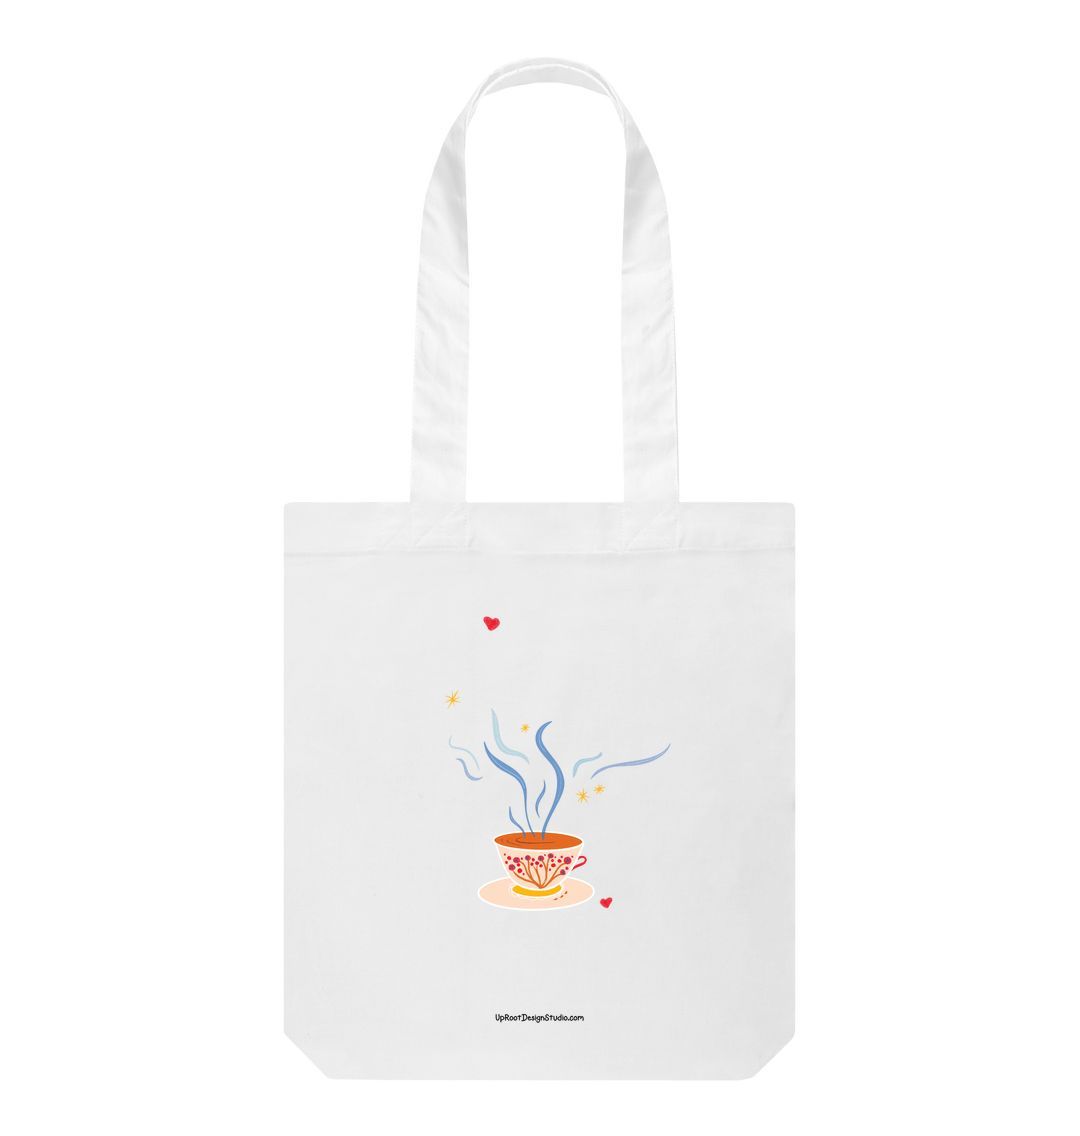 White Teacup 100% Organic Cotton Grocery Tote Bag Floral Cup & Saucer, Steam, Hearts & Stars